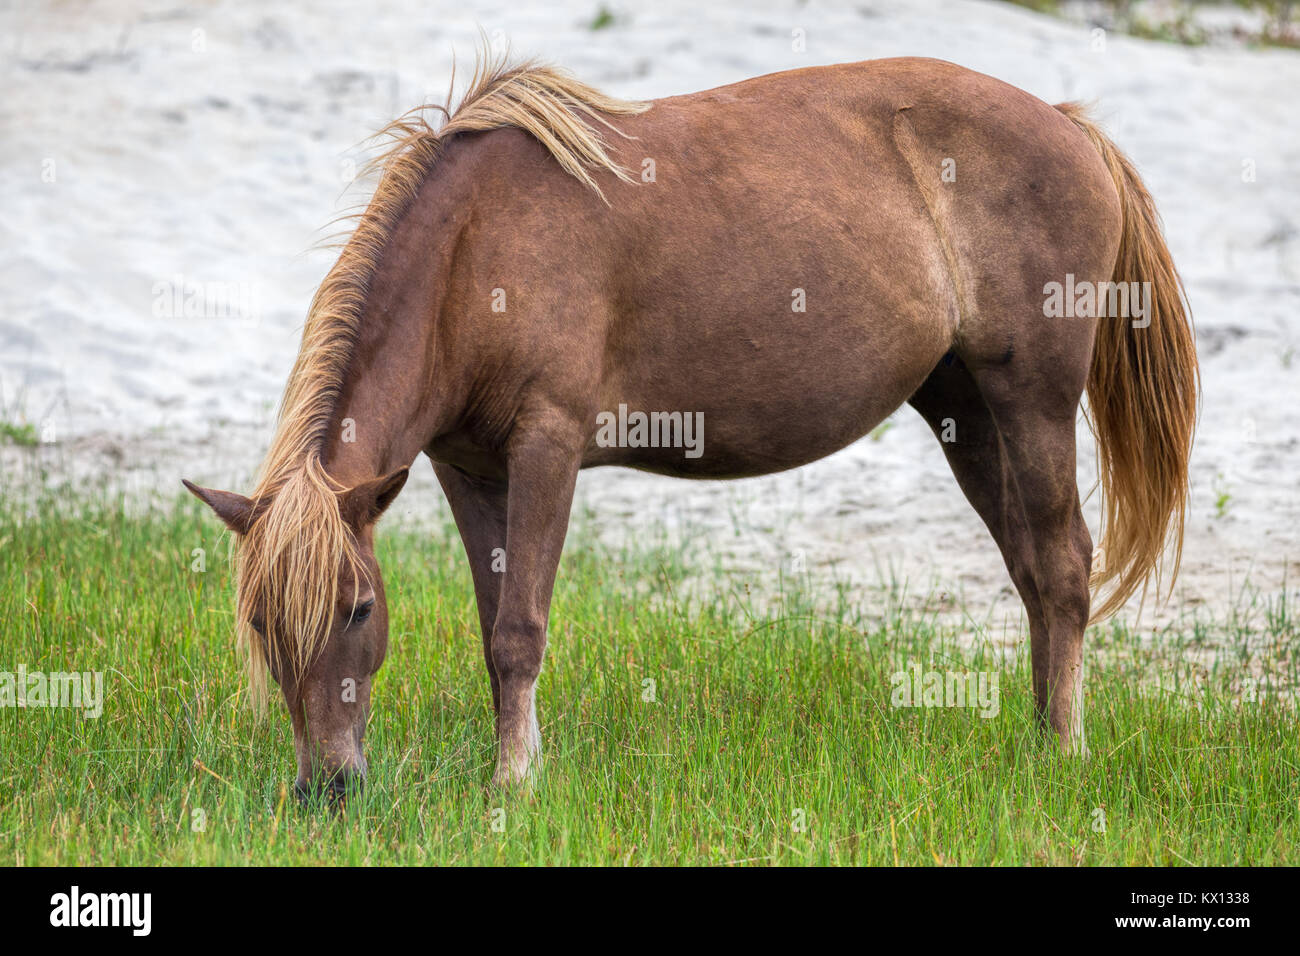 A Wild pony, horse, of Assateague Island, Maryland, USA. These animals are also known as Assateague Horse or Chincoteague Ponies. Stock Photo